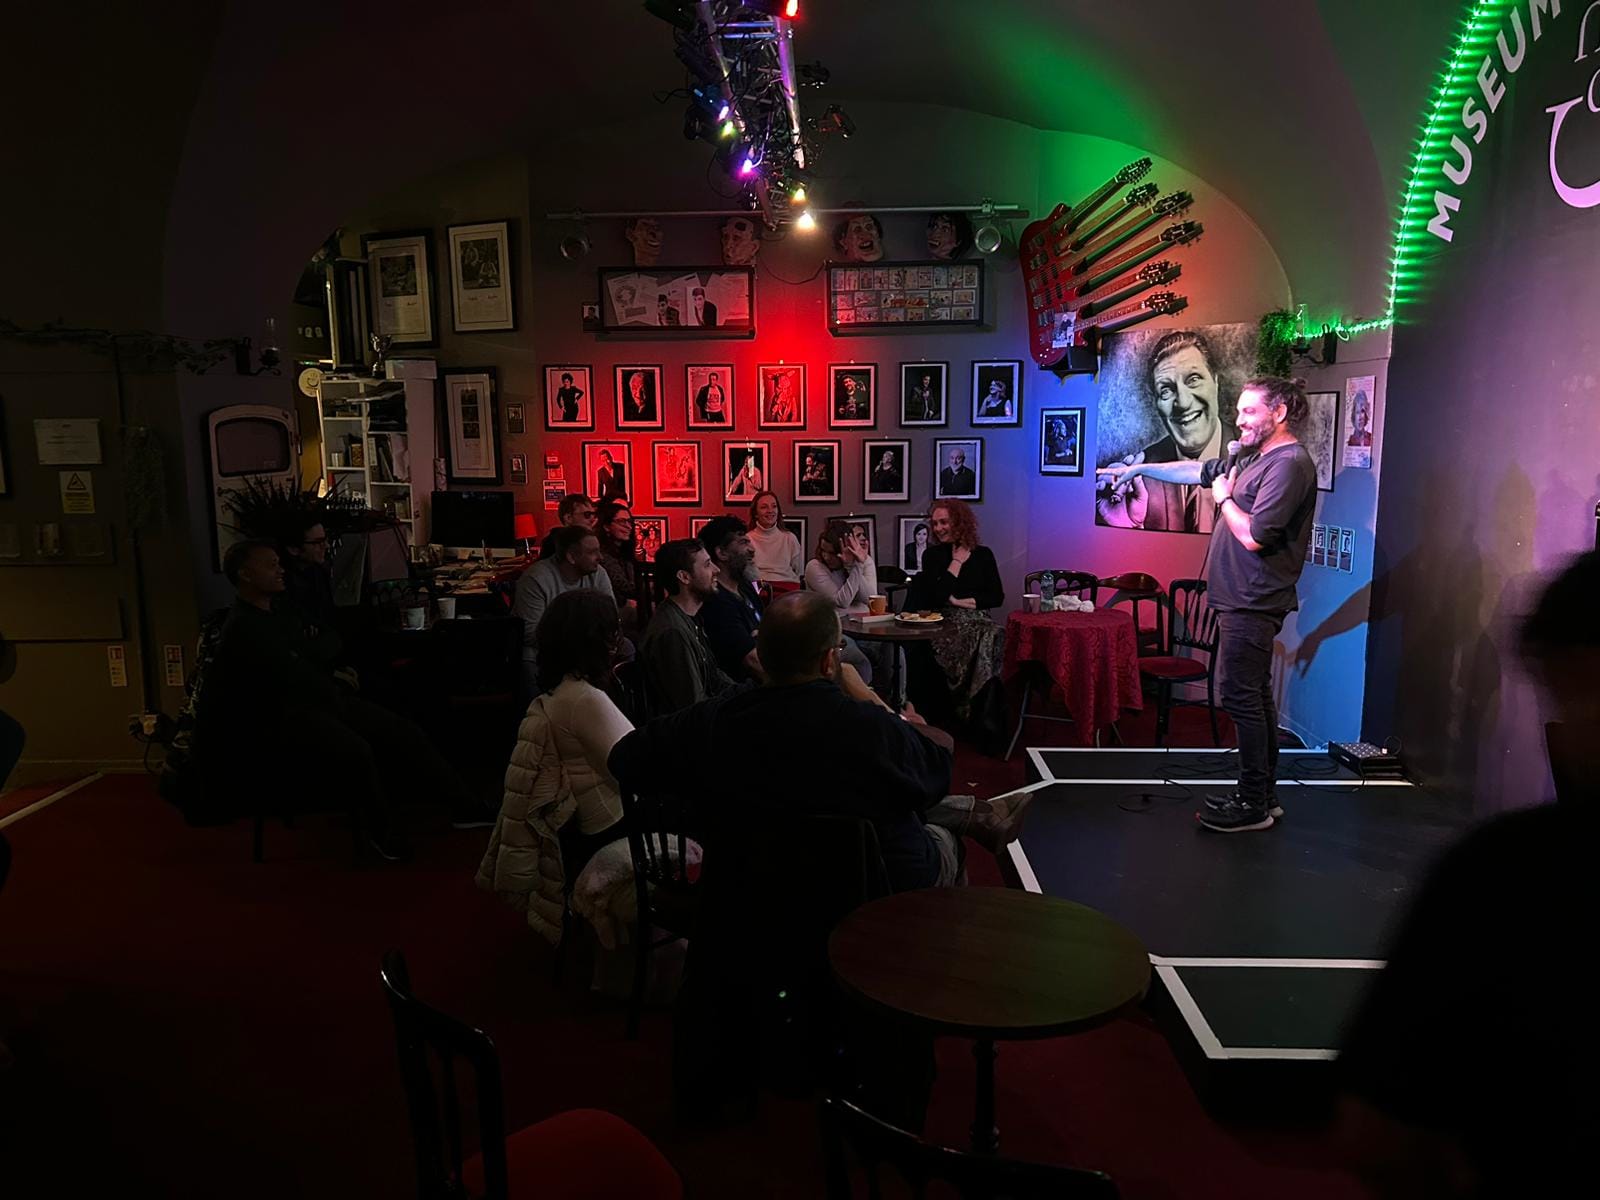 Louie Christie performing stand-up comedy while audience laughs. On the wall behind there is a big painting of Tommy Cooper and smaller photos of various famous stand up comedians. Louie is pointing at the audience and seems to be having a good time. His hair is in a man bun. He's pointing at a woman in the audience and she has her hands crossed in front of her face as if she doesn't want to talk. Which is ironic, because it was about the only time in the whole night that she shut up.